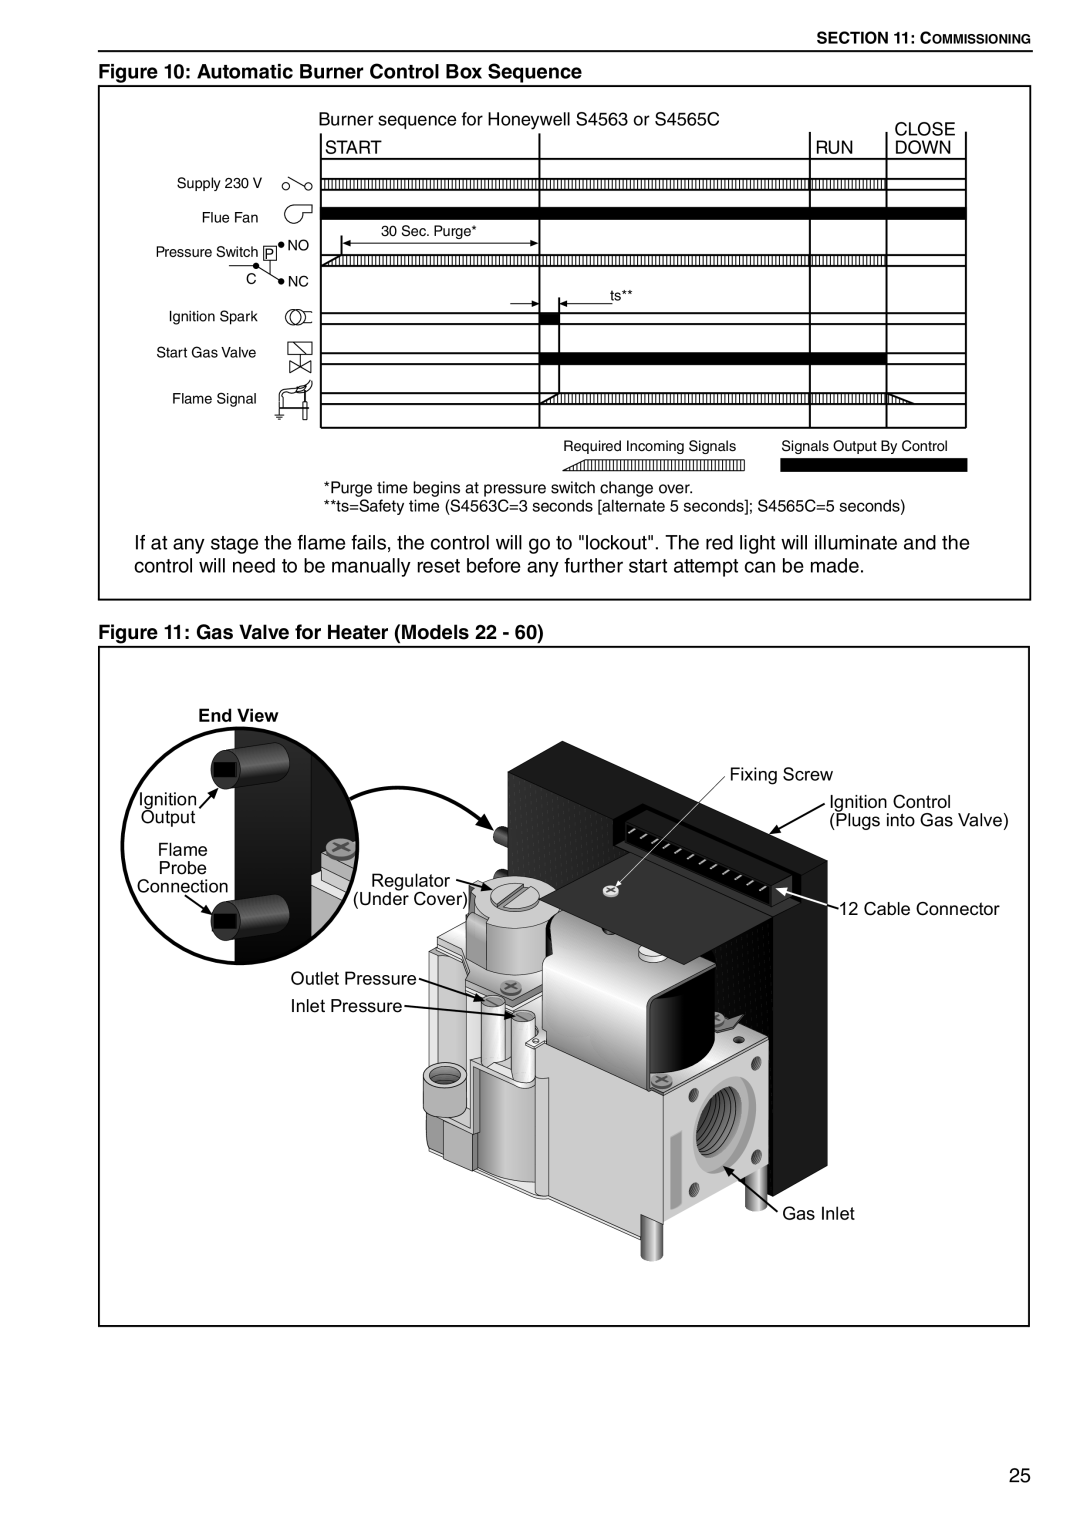 Roberts Gorden CTU 22 TO 115 service manual Automatic Burner Control Box Sequence, Gas Valve for Heater Models 